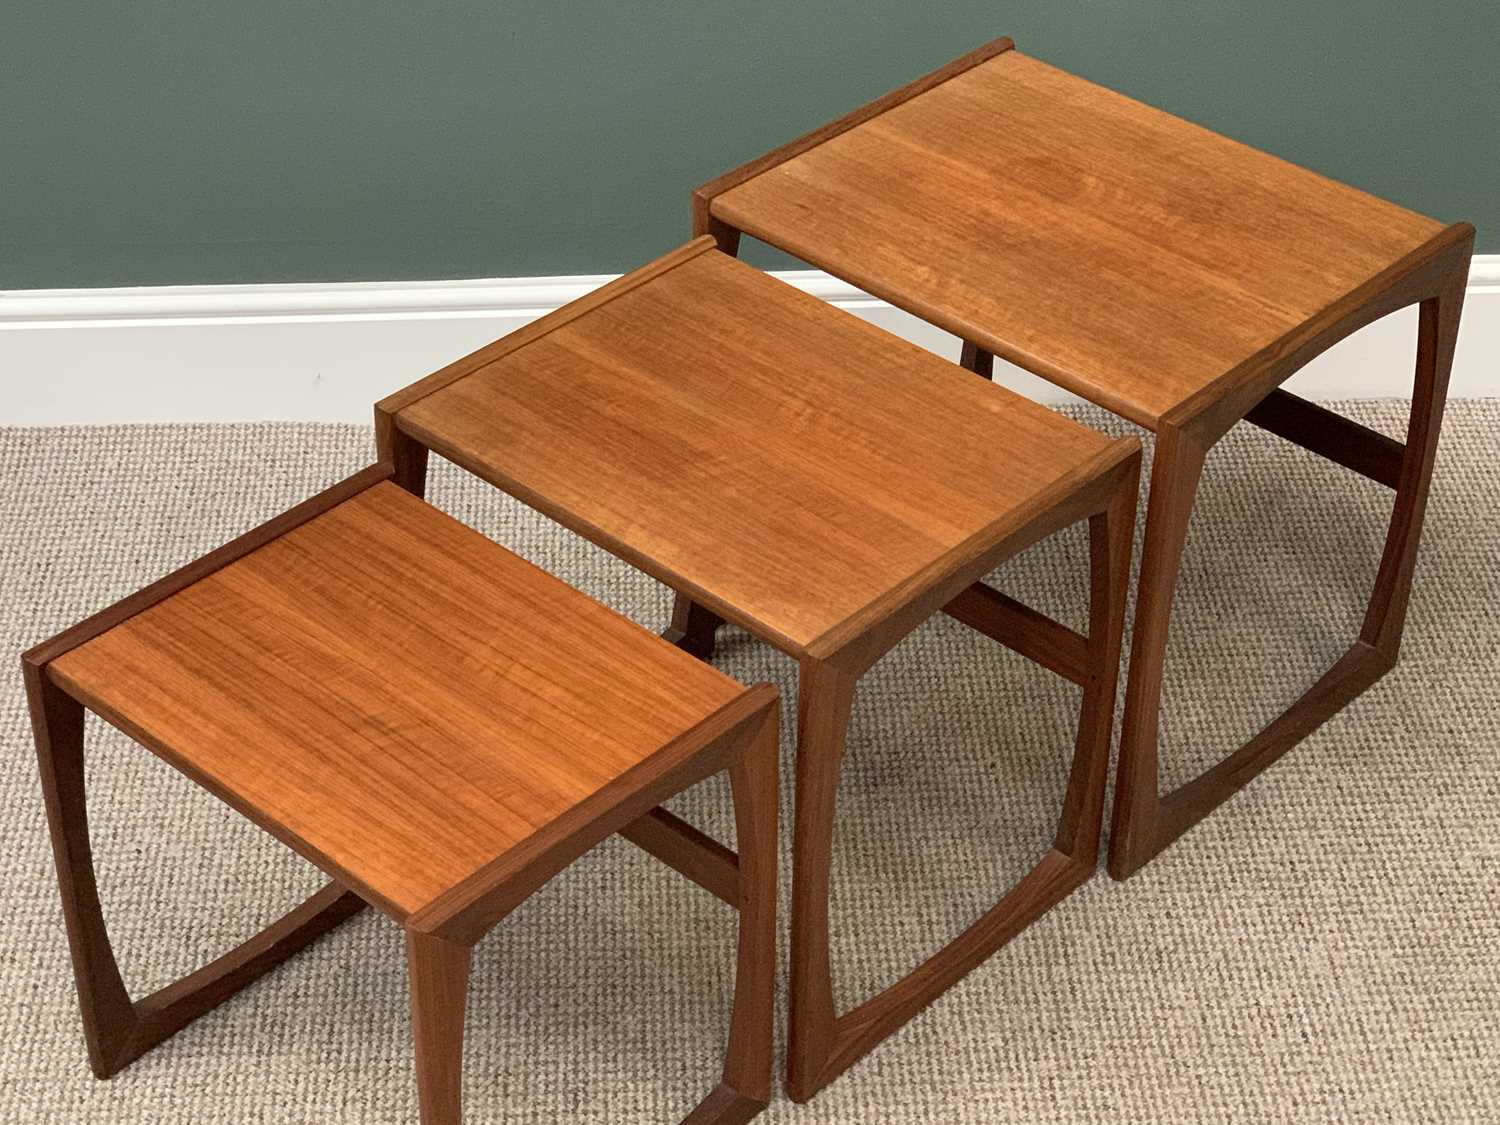 G-PLAN STYLE NEST OF THREE TABLES, mid Century, teak, 49cms H, 53cms W, 43cms D the largest - Image 2 of 2